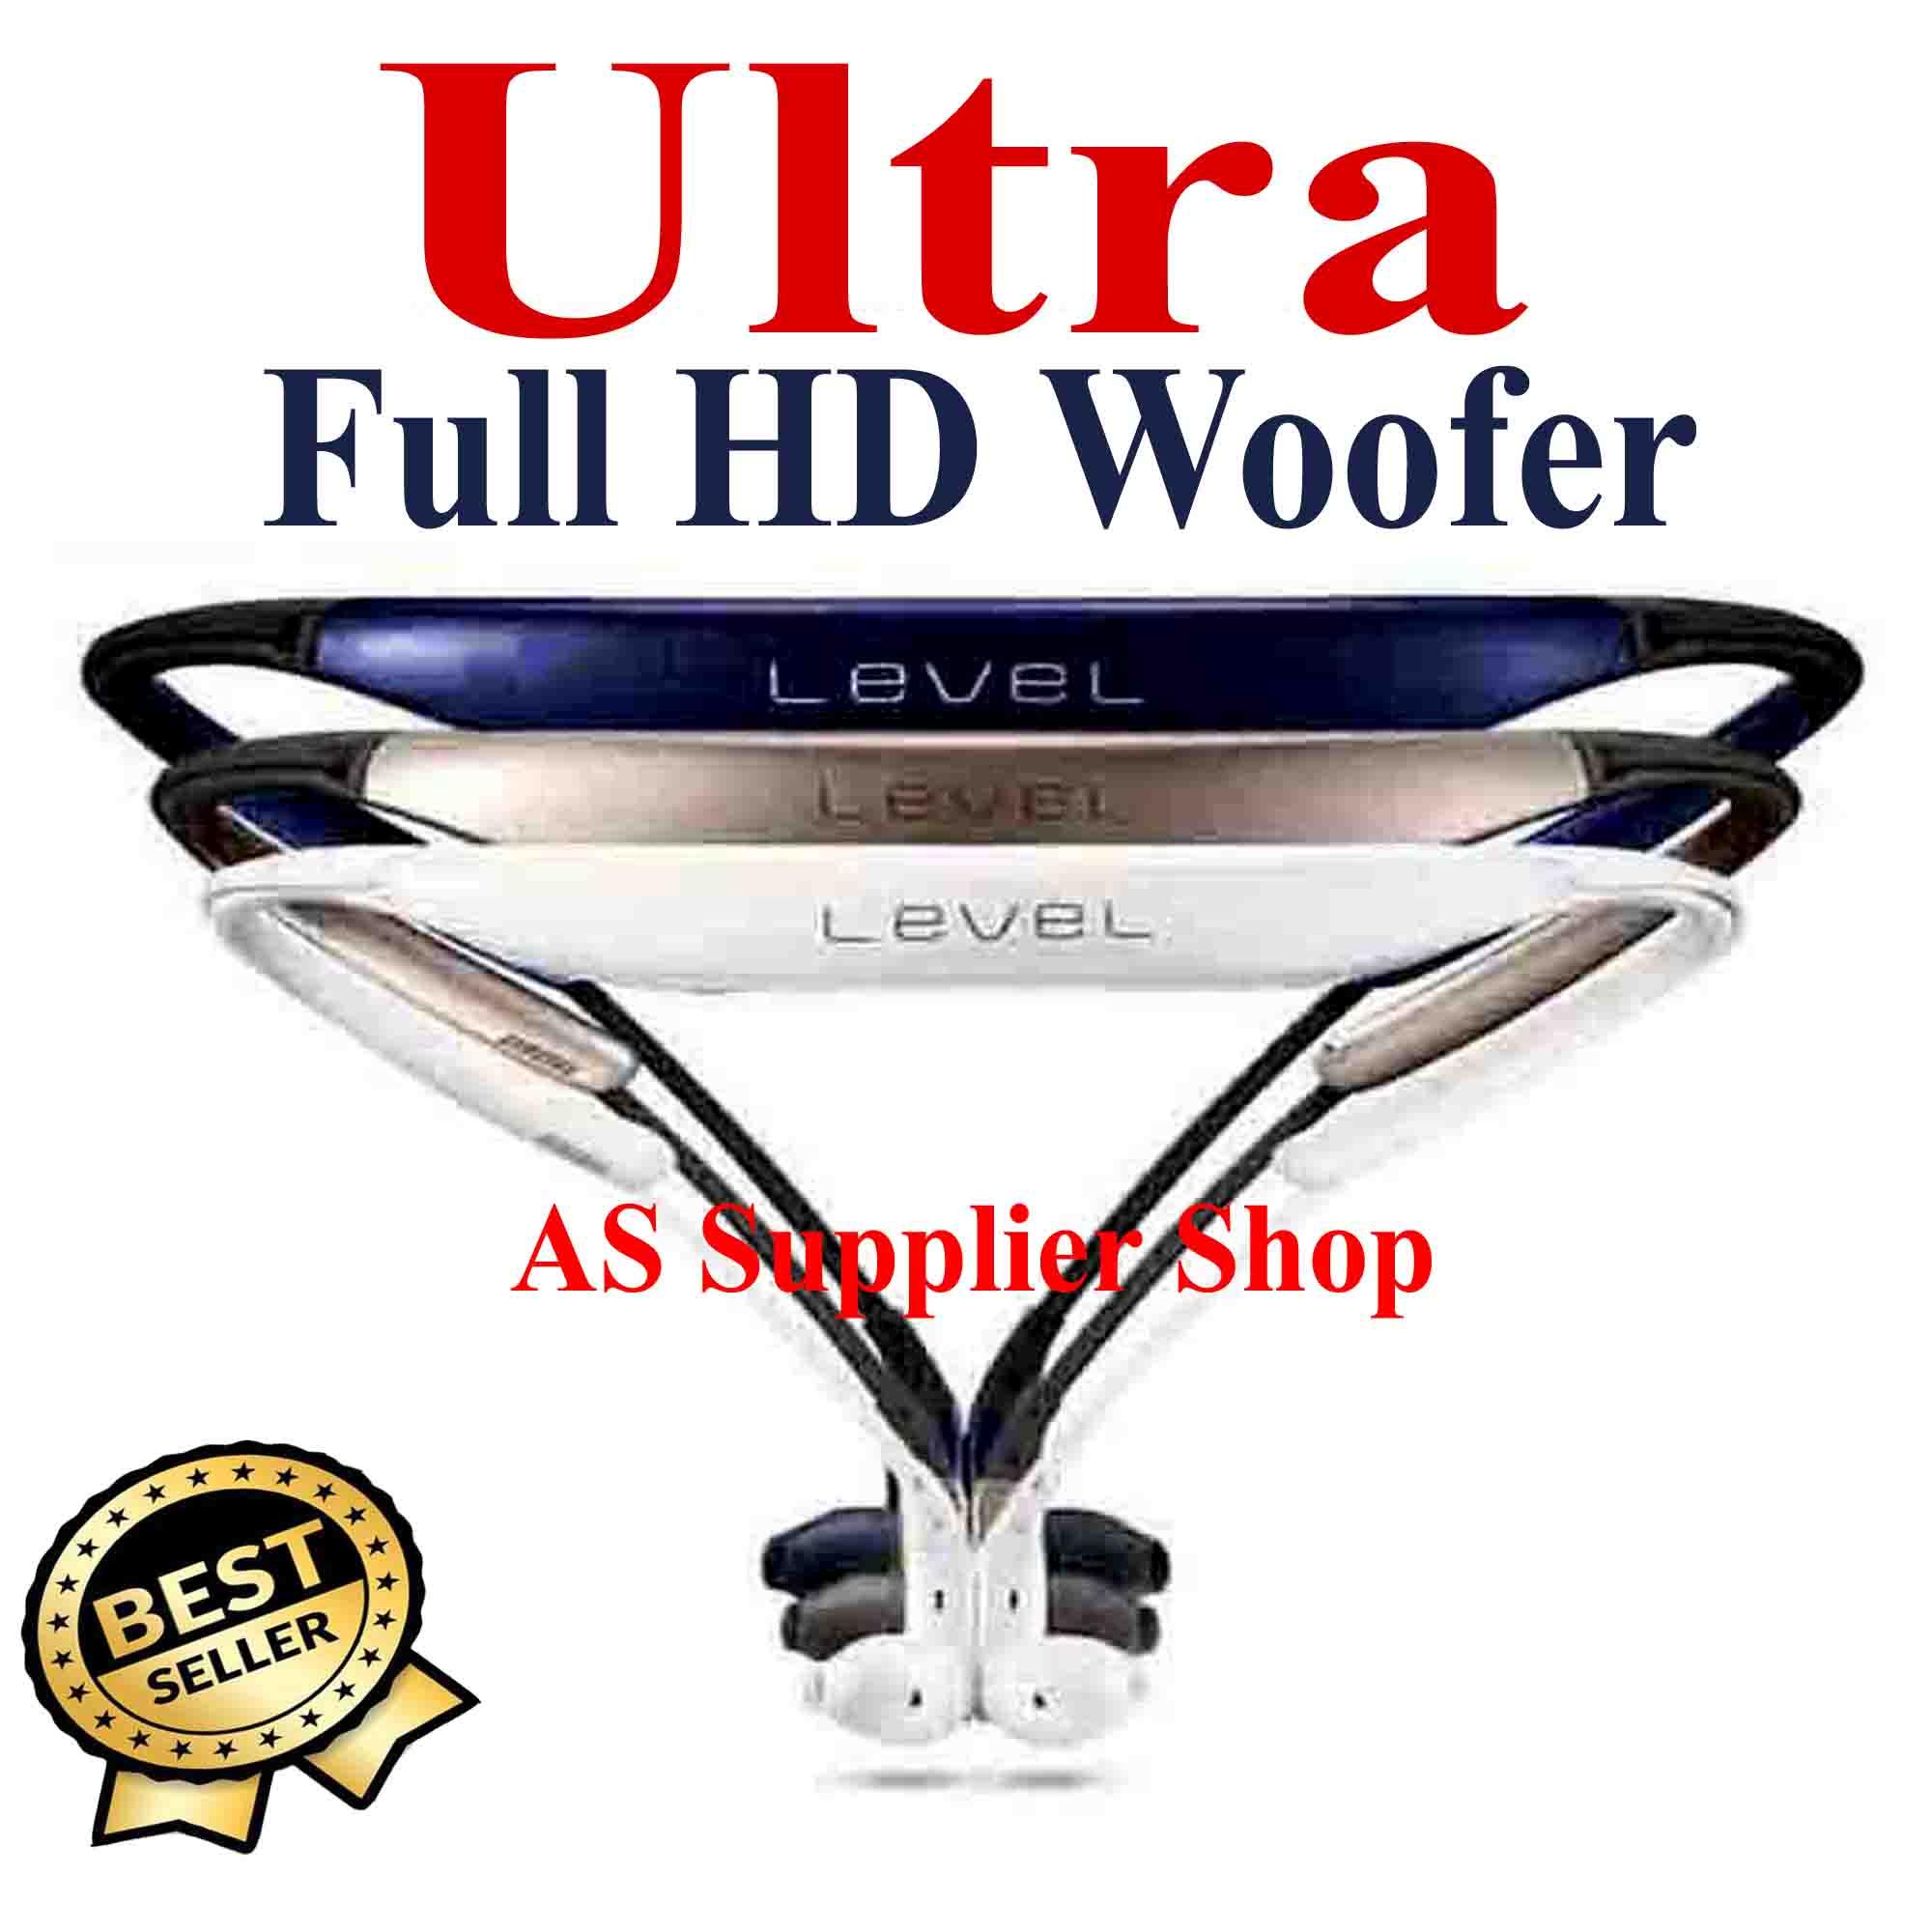 Full Hd Samsung Level U Multimedia Handfree Full Hd Woofer Wireless Handfree Bluetooth Handfree Wireless Headphone Bluetooth Headphone Wireless Bluetooth Headset Neck Band Hand Free Buy Online At Best Prices In Pakistan